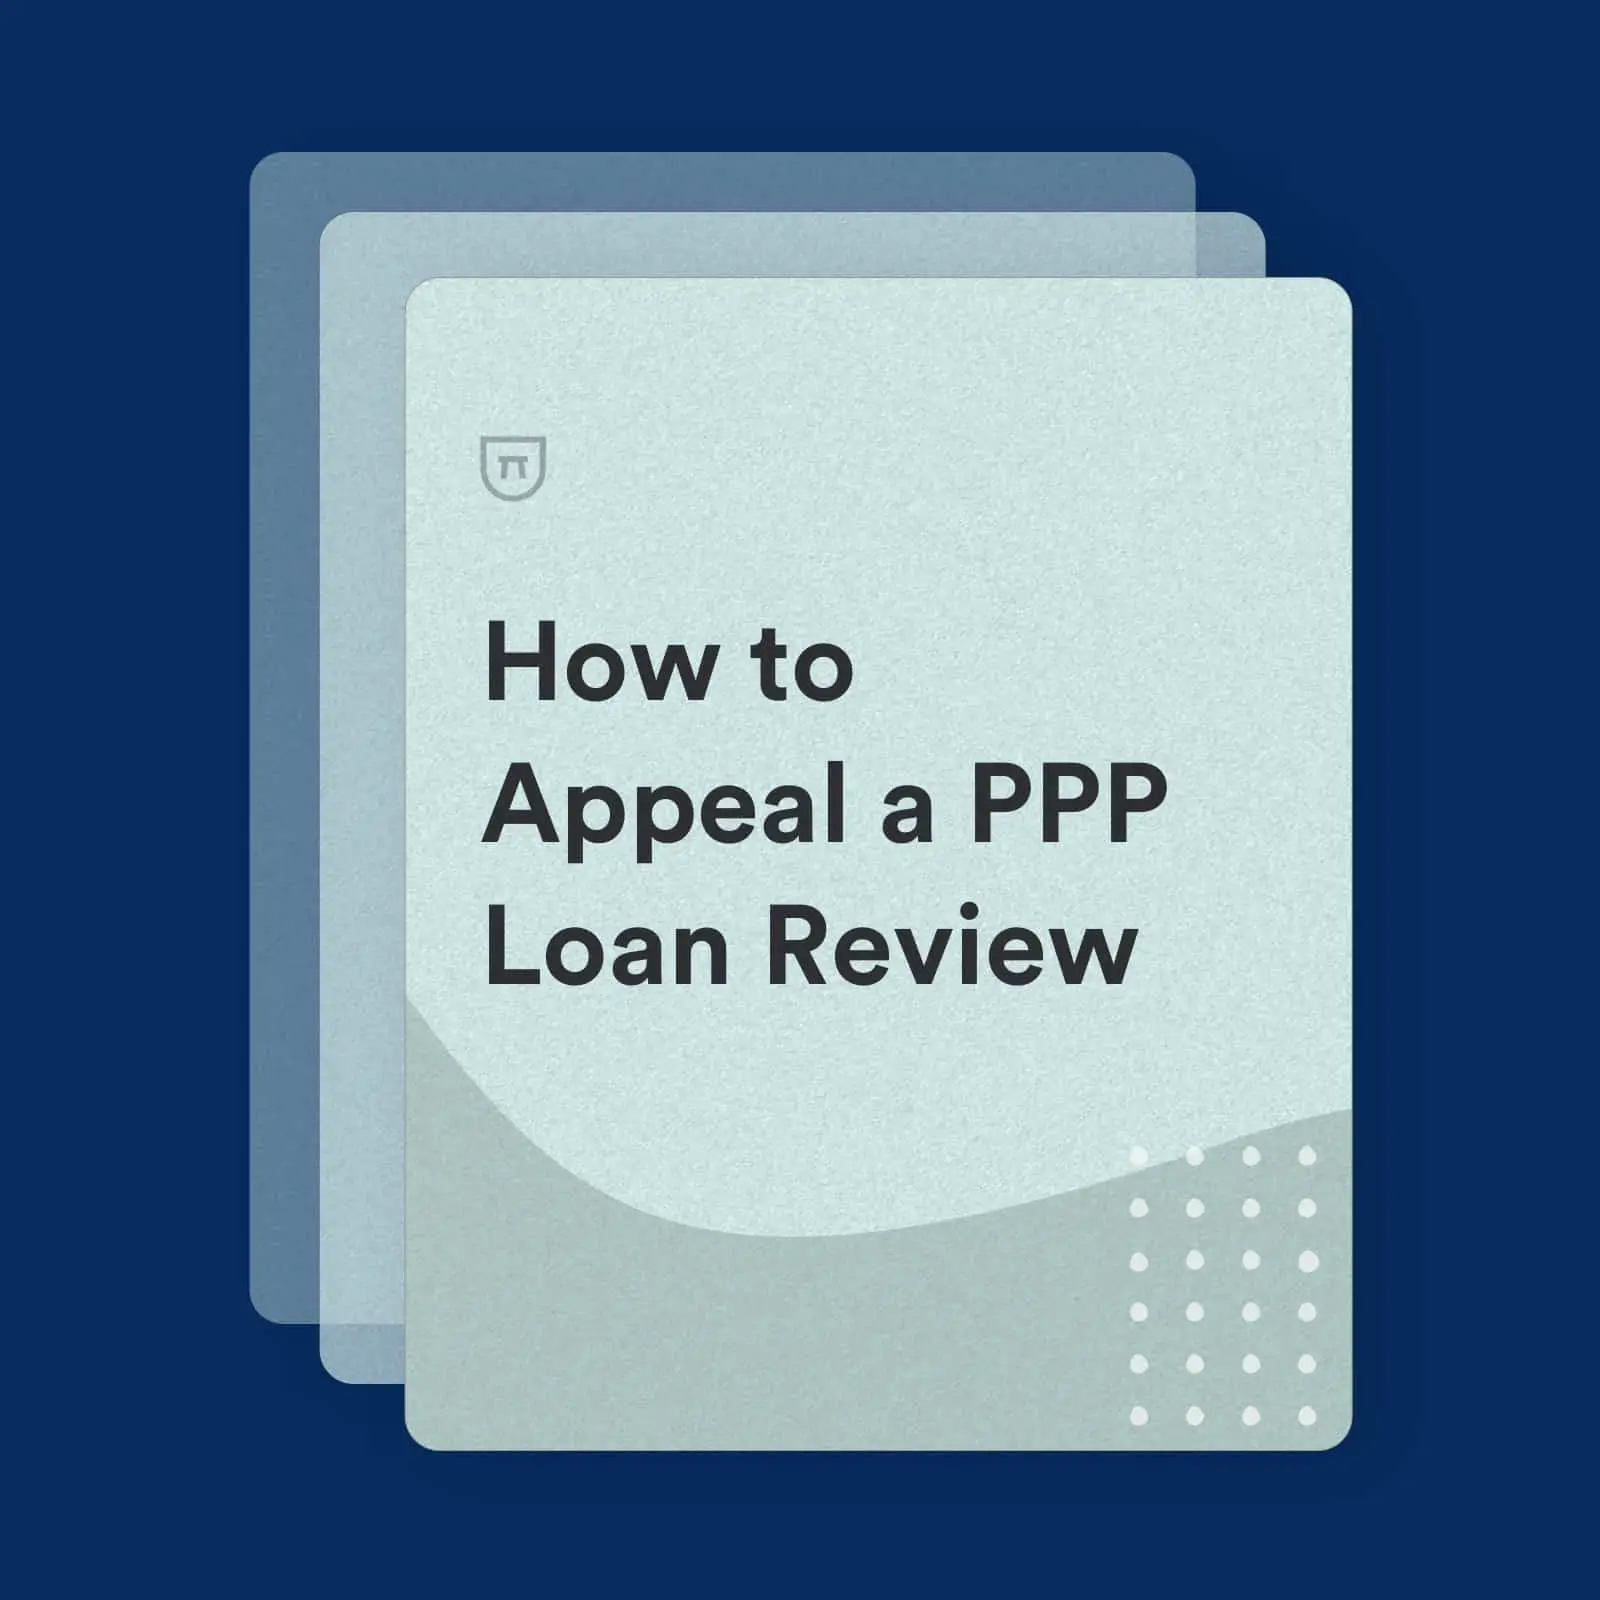 How to Appeal a PPP Loan Review